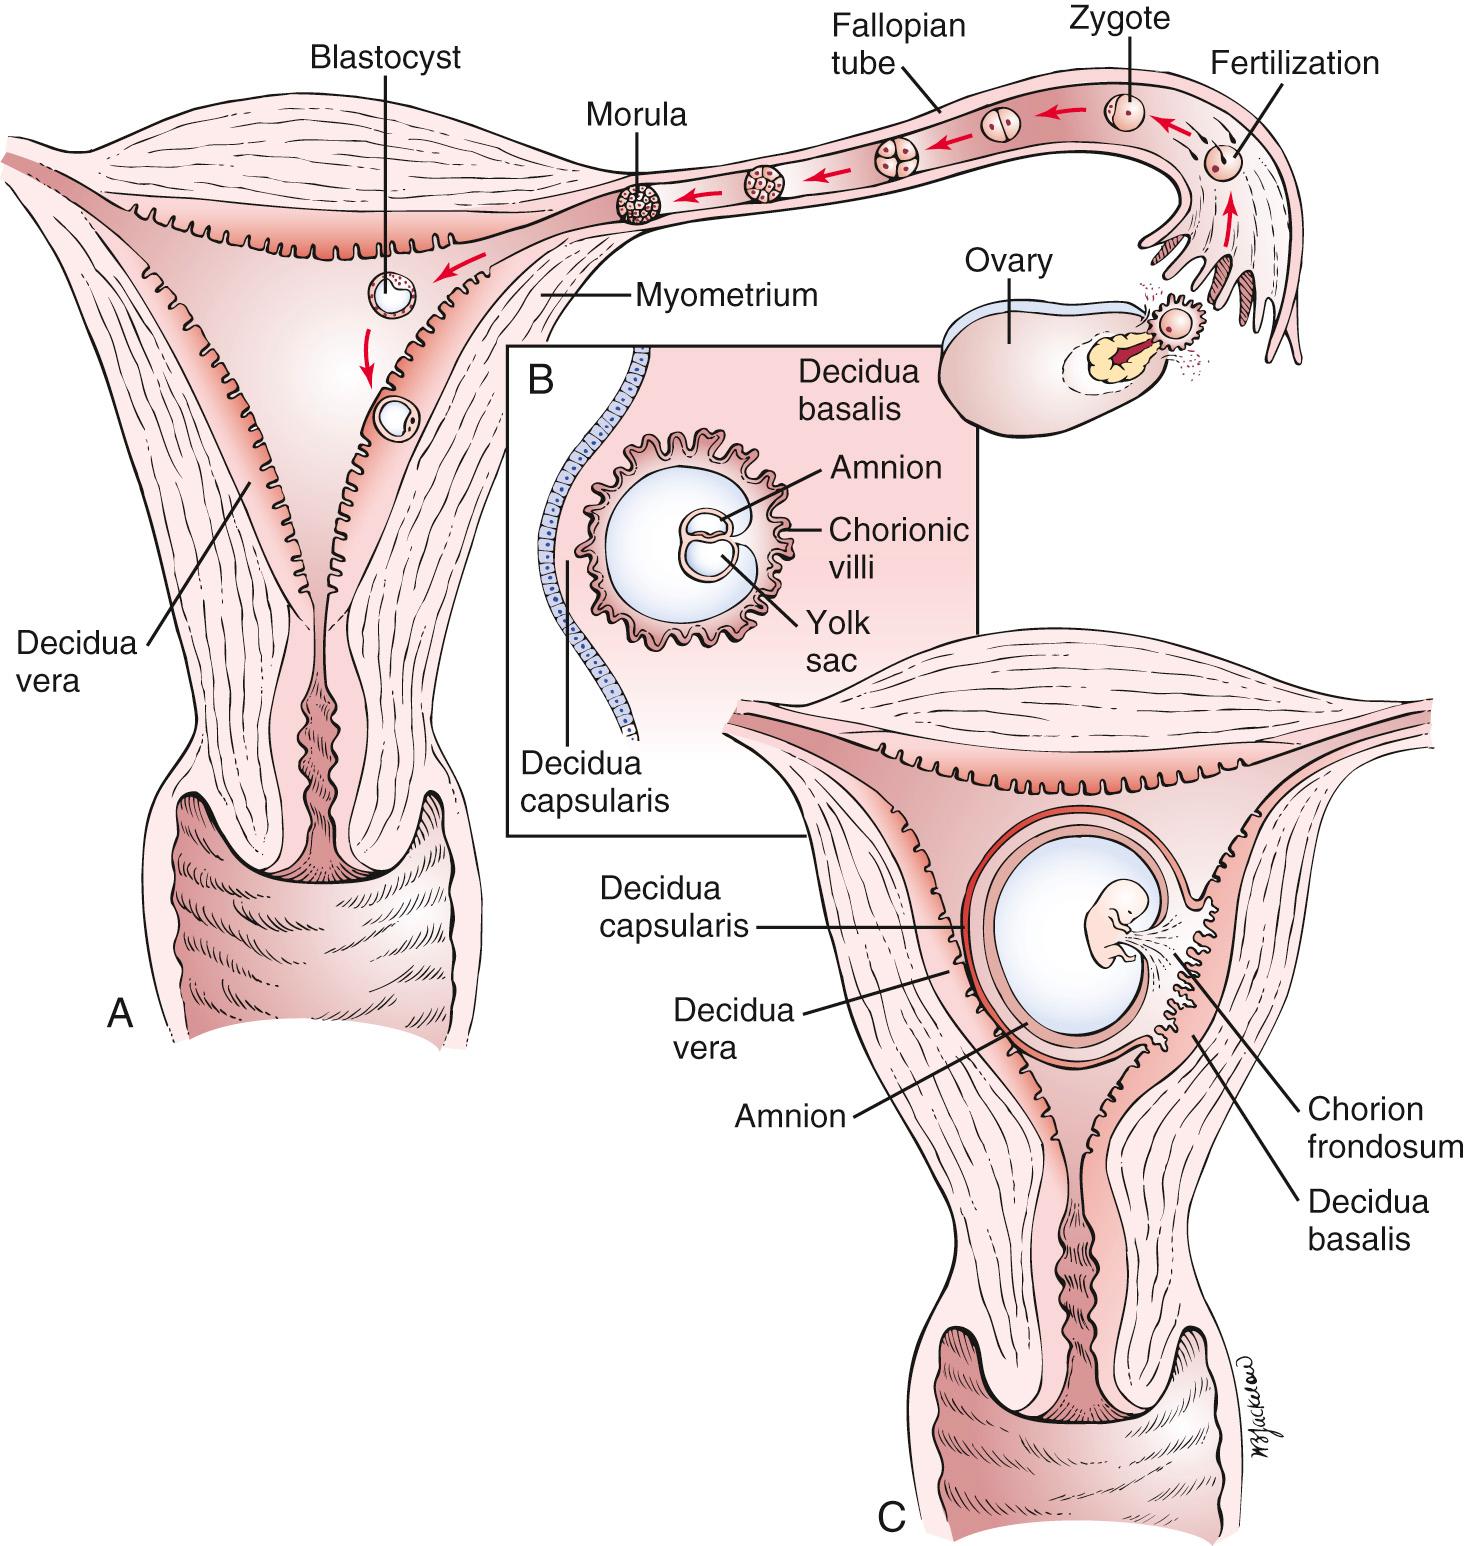 Fig. 23.1, (A) Fertilization and implantation. (B and C) Cross-sectional view through the uterus of a pregnant woman at approximately 8 days and 20 days, respectively.